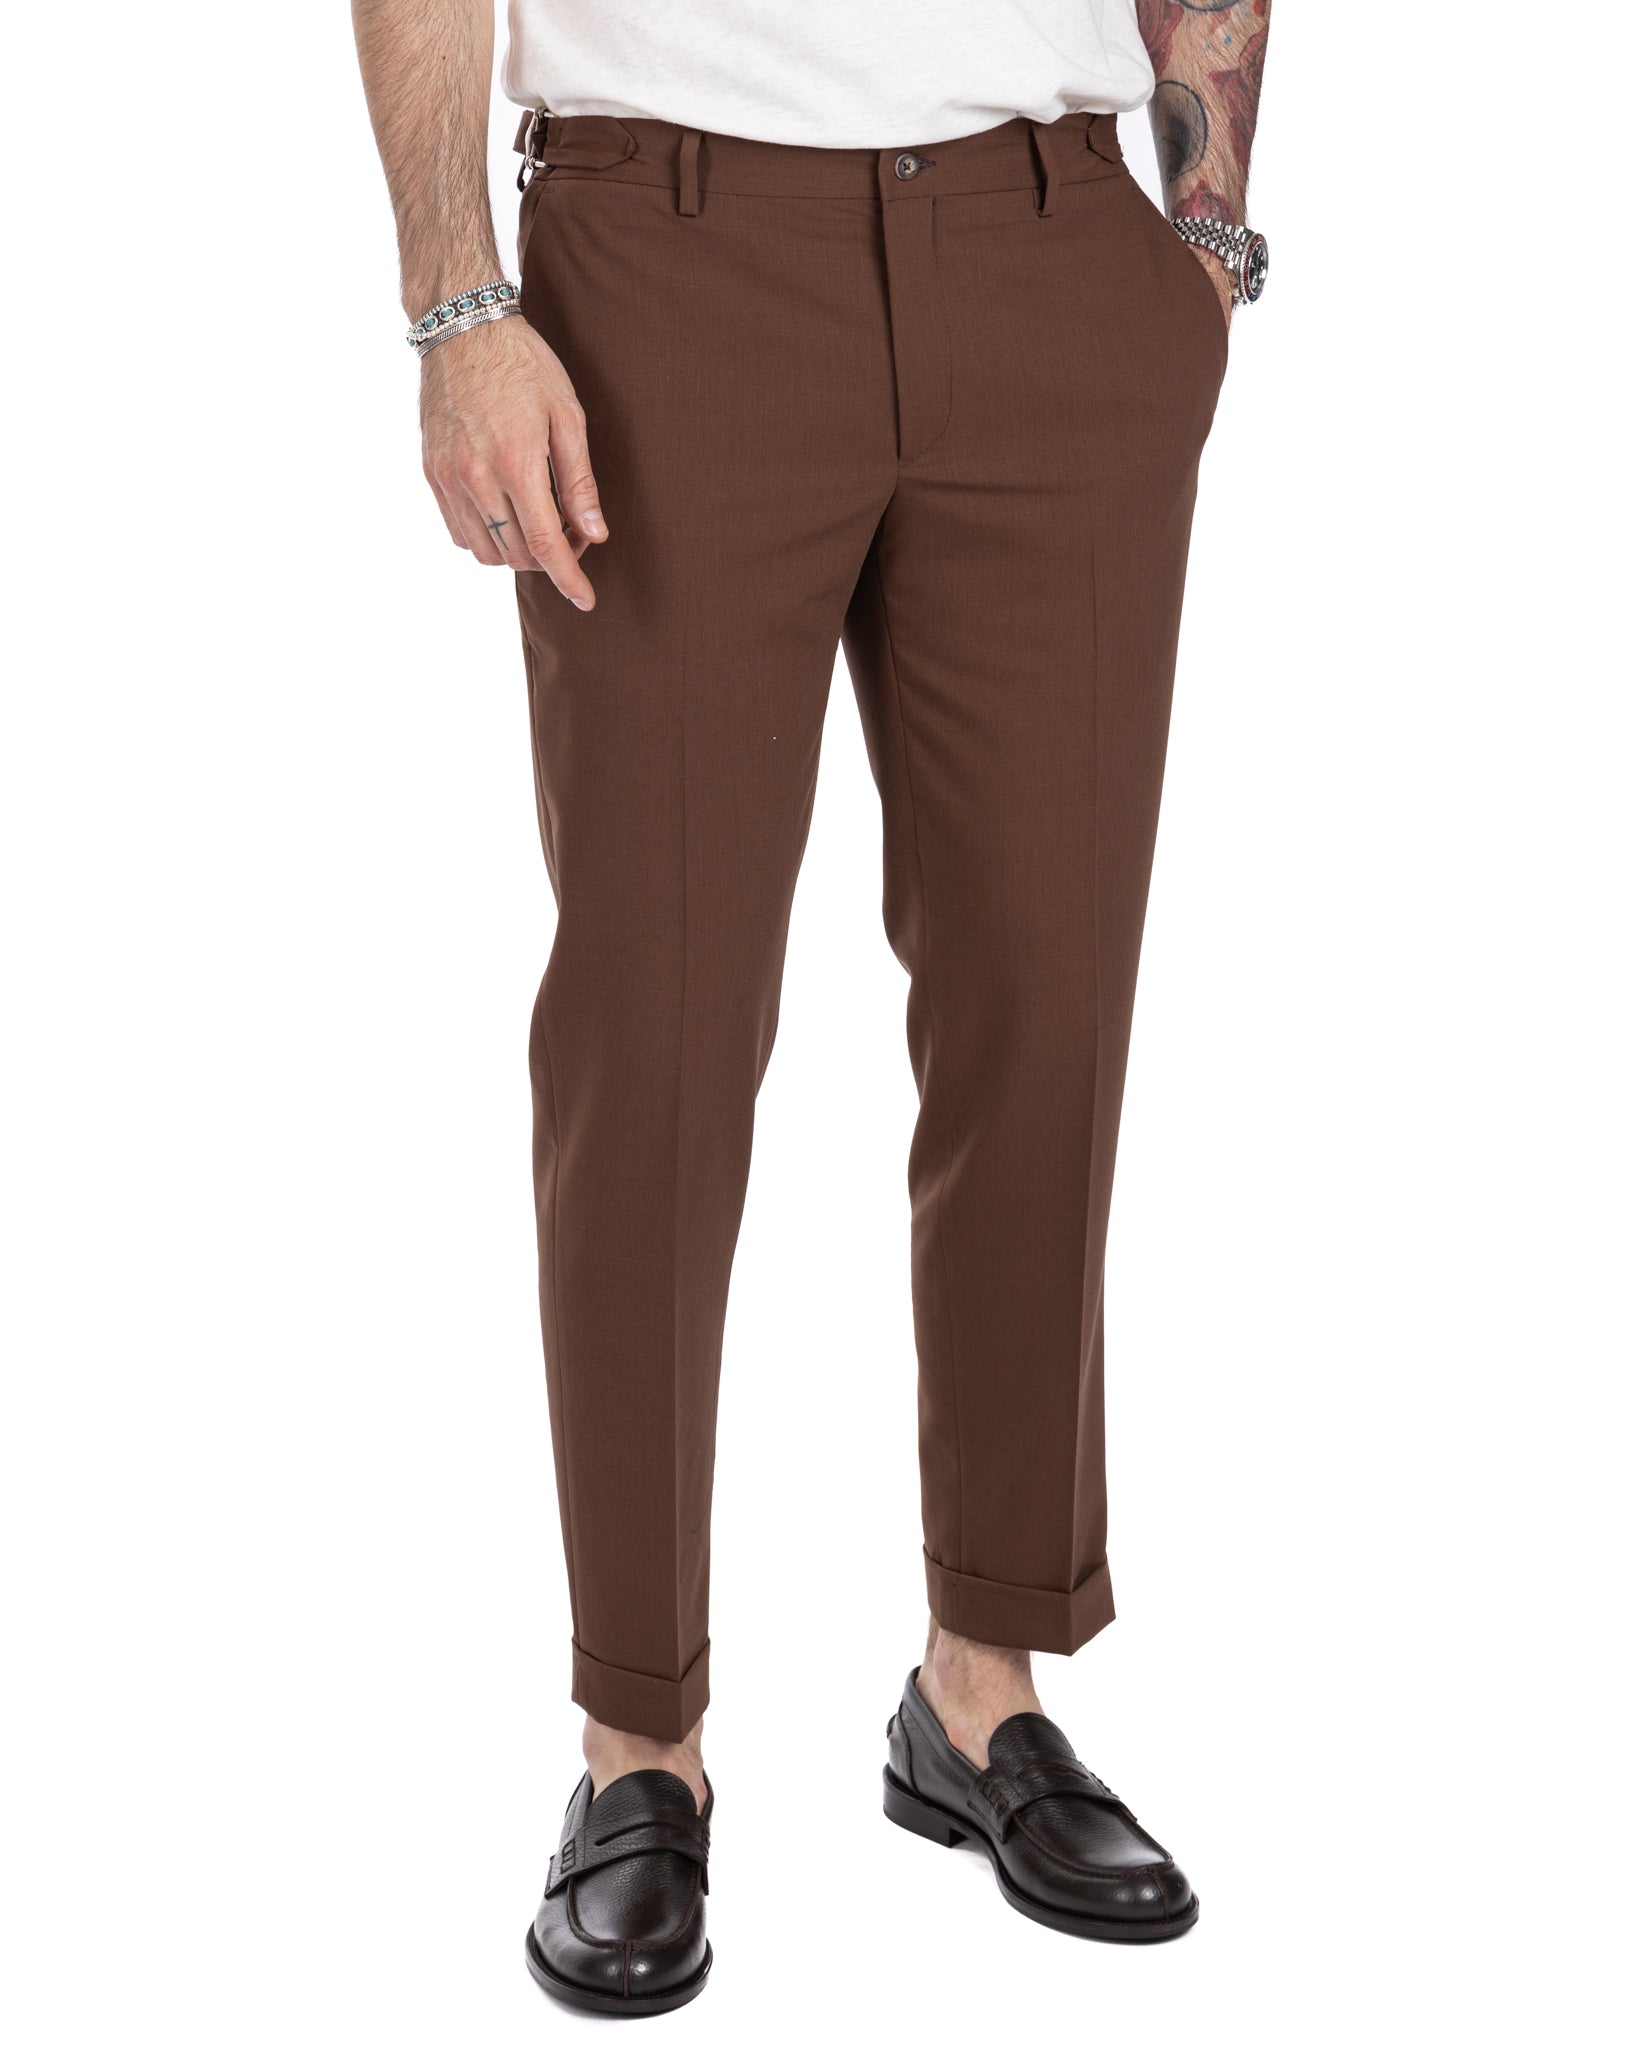 Trani - trousers with dark brown buckles